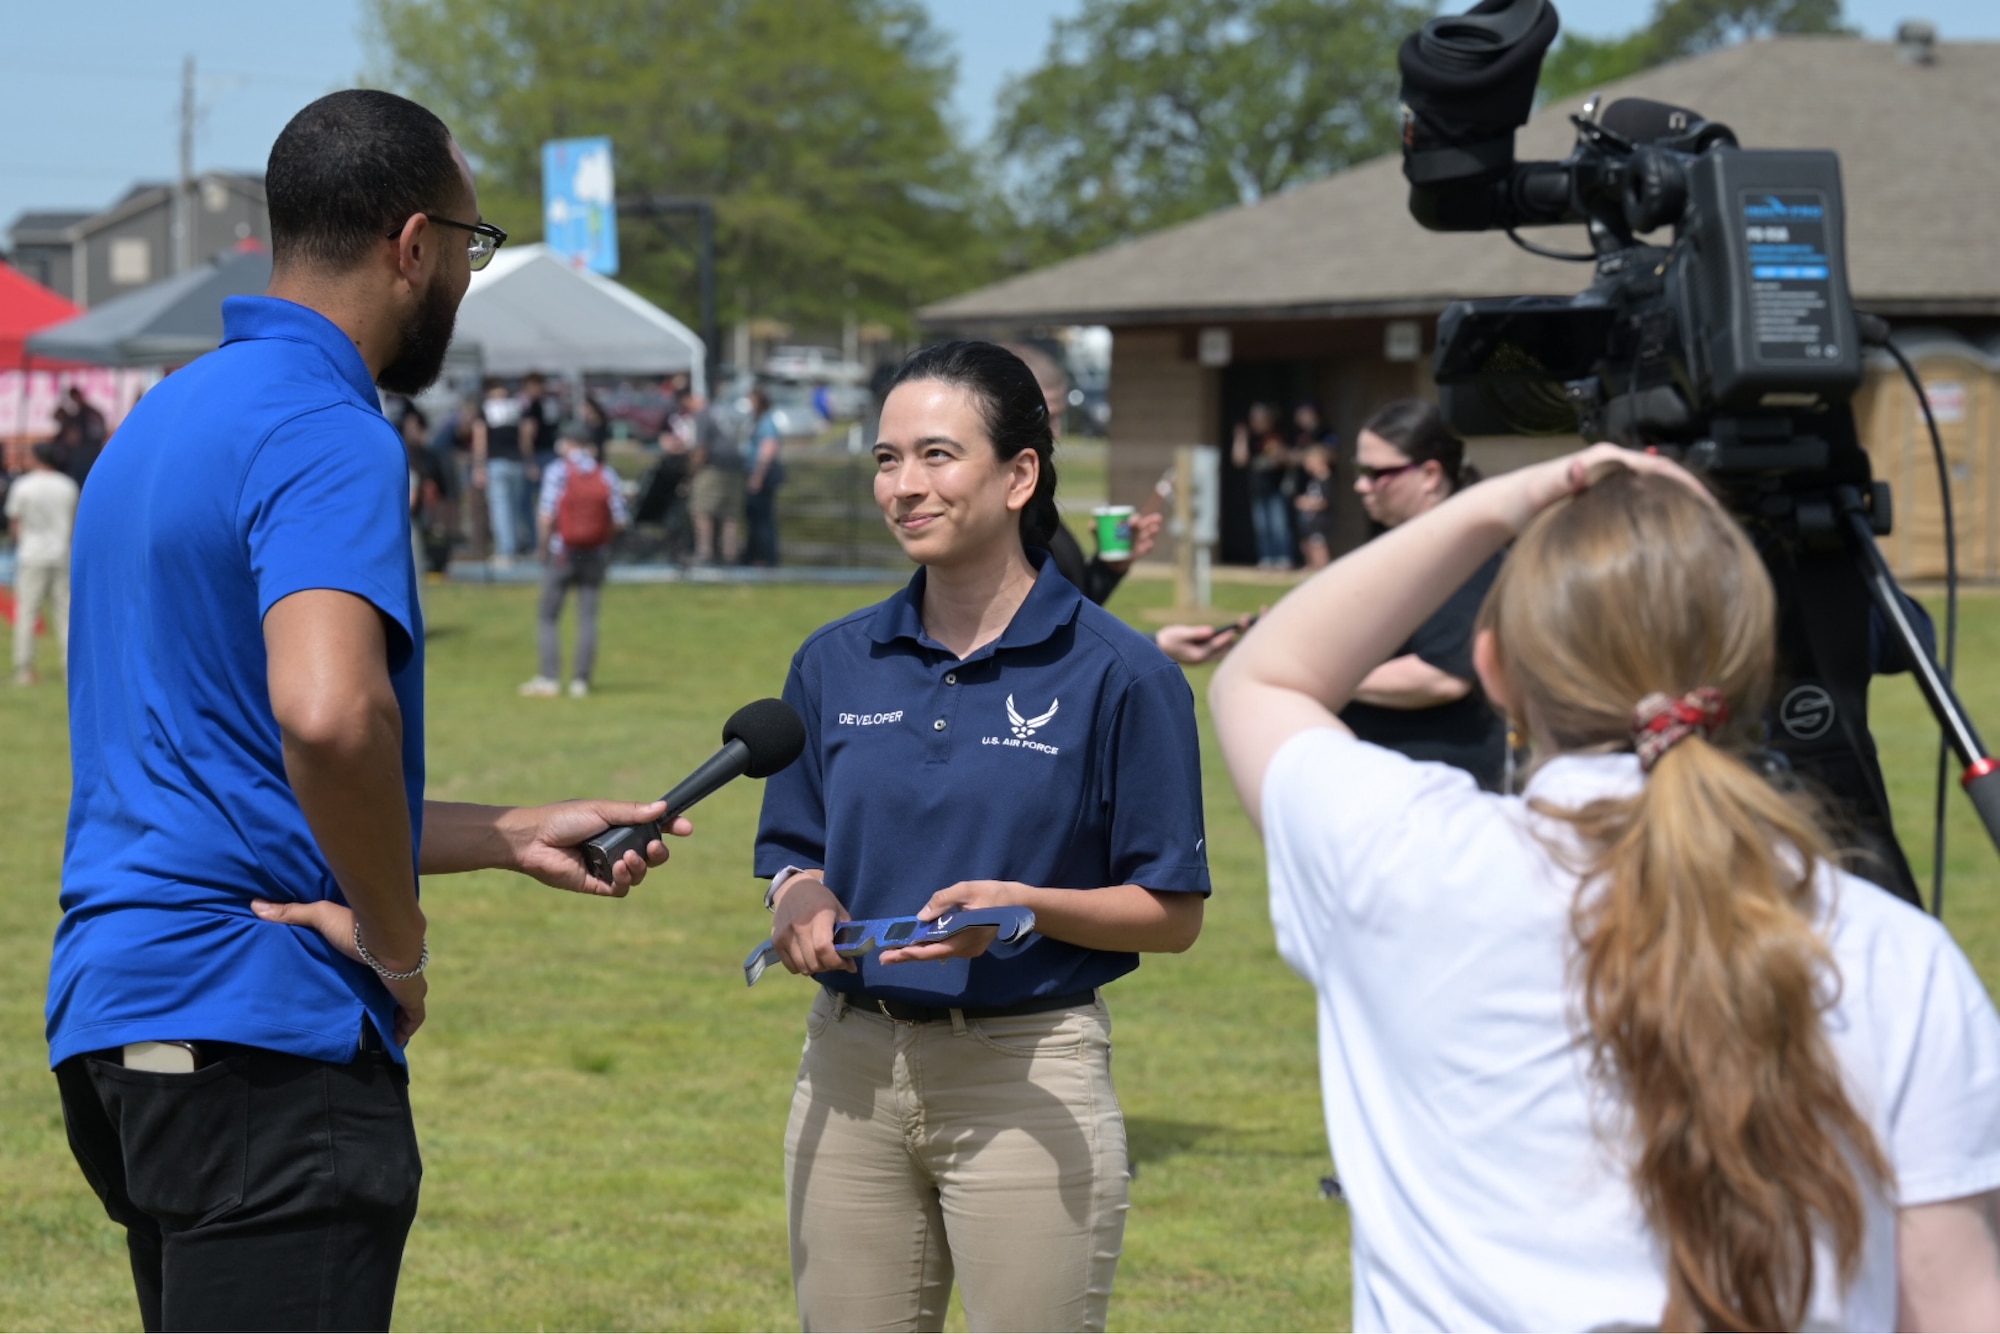 Staff Sgt. Vanesa Wagner speaks with KARK news about career opportunities in the Air Force on April 8, 2024, at a solar eclipse viewing event in Searcy, Arkansas.